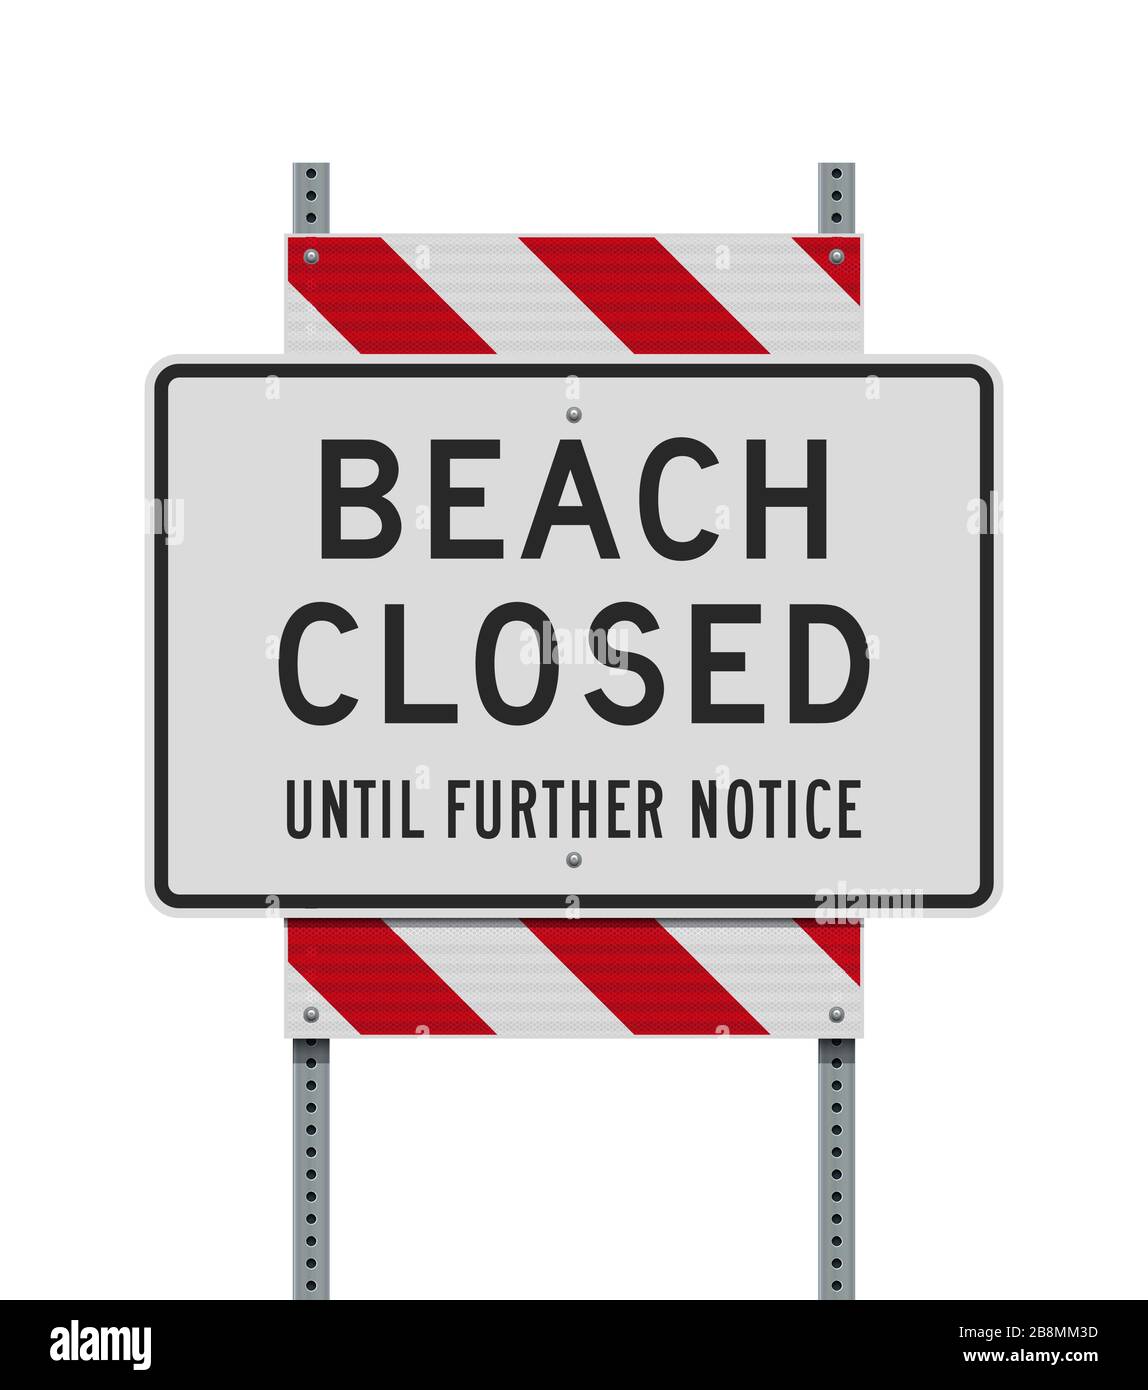 Vector illustration of the Beach Closed Until Further Notice sign on metallic posts Stock Vector